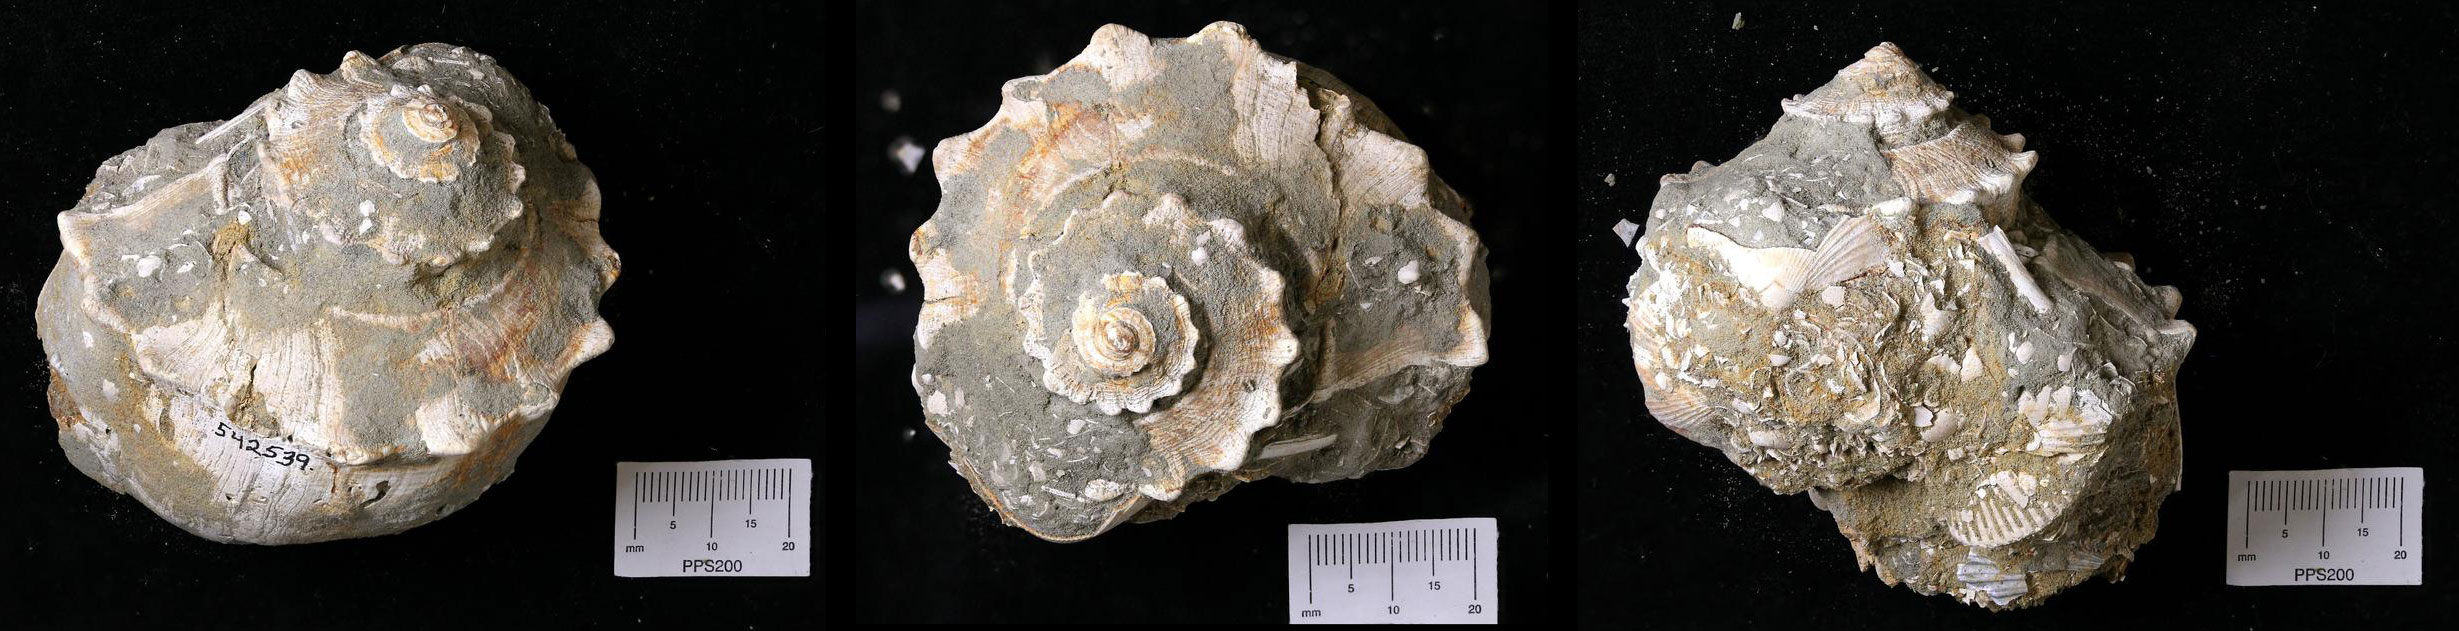 Photograph showing three views of a fossil whelk shell from the Miocene of Maryland.